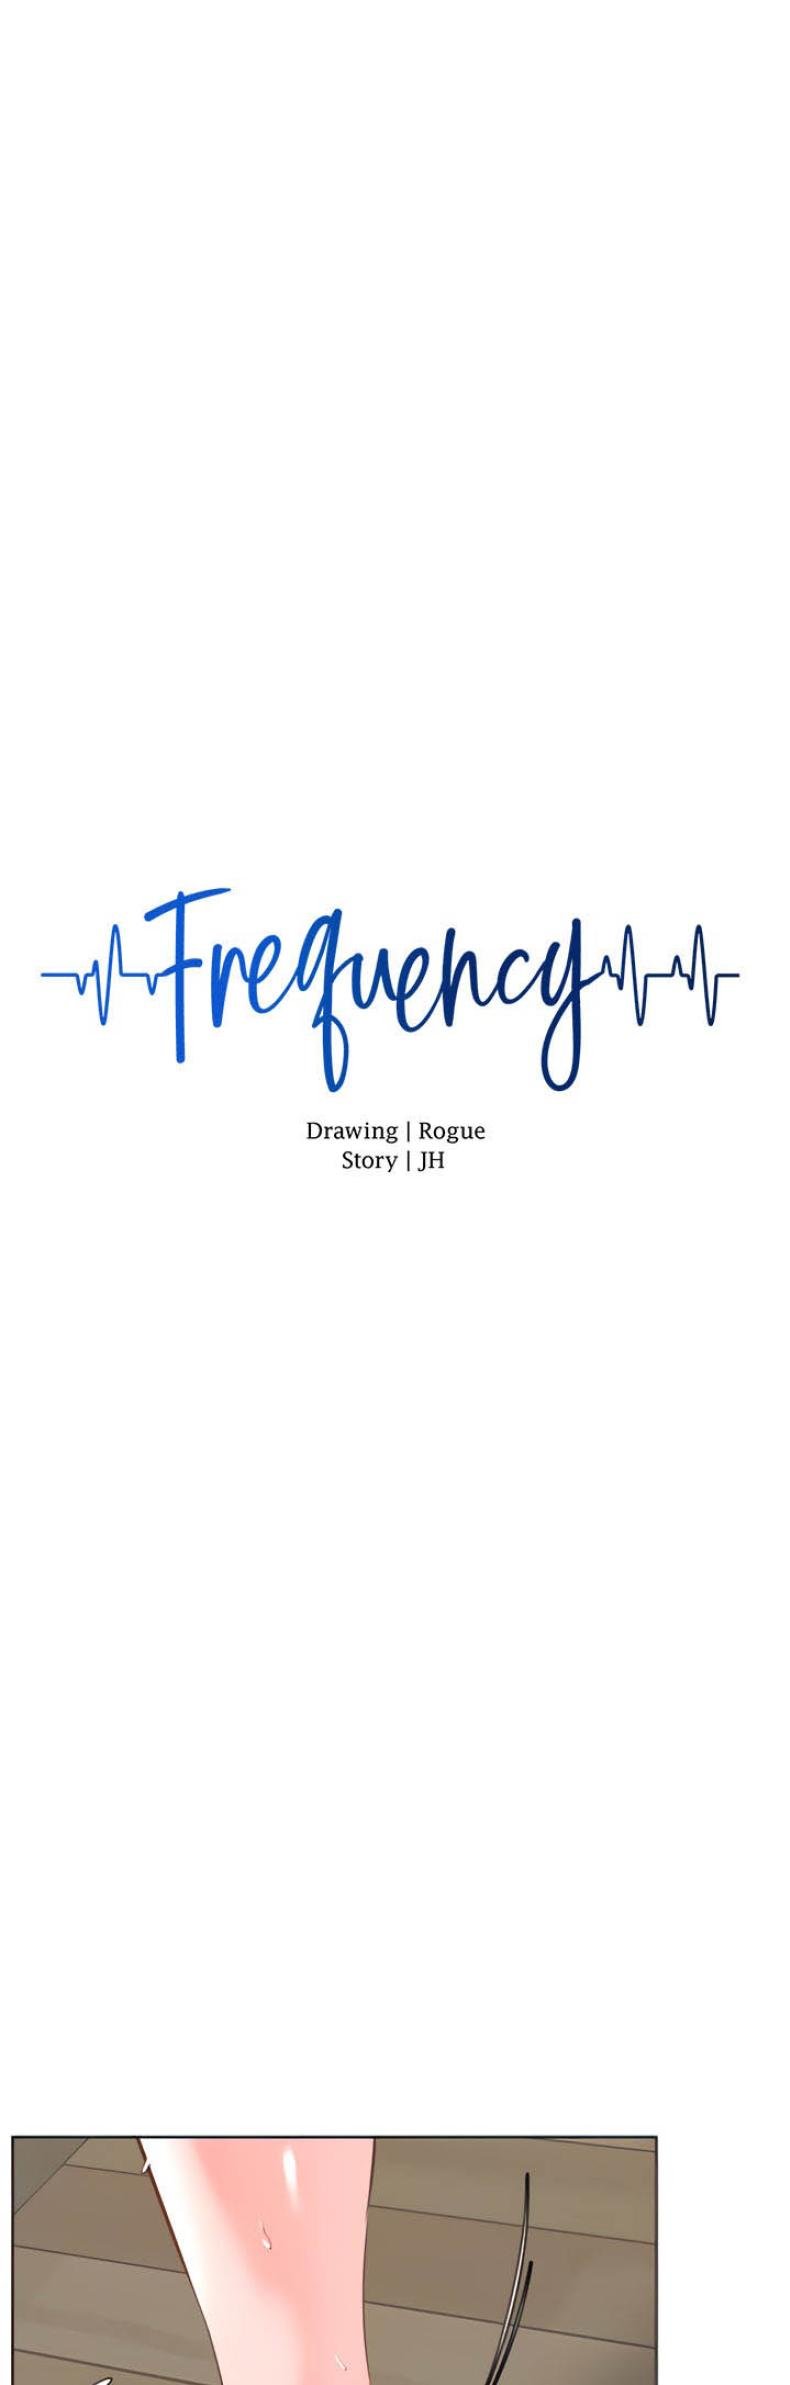 Frequency 24 ภาพที่ 8